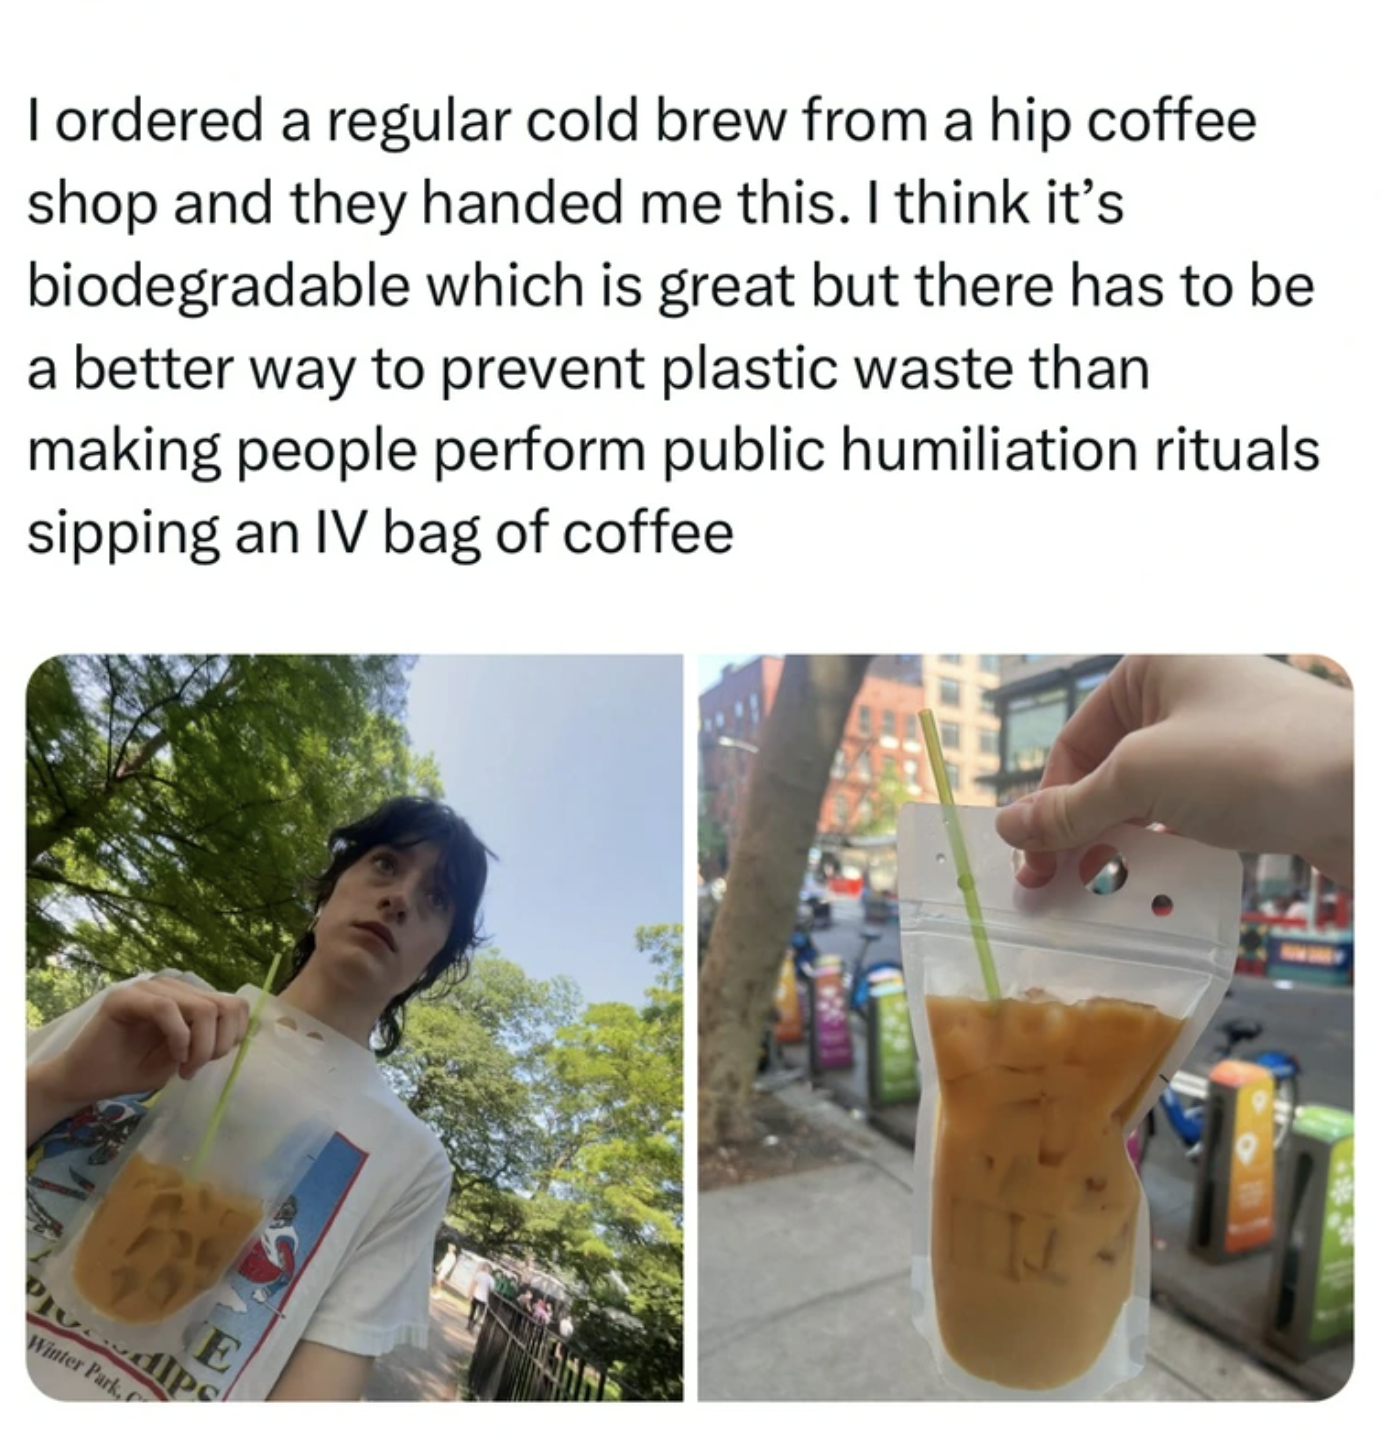 vietnamese iced coffee - I ordered a regular cold brew from a hip coffee shop and they handed me this. I think it's biodegradable which is great but there has to be a better way to prevent plastic waste than making people perform public humiliation ritual